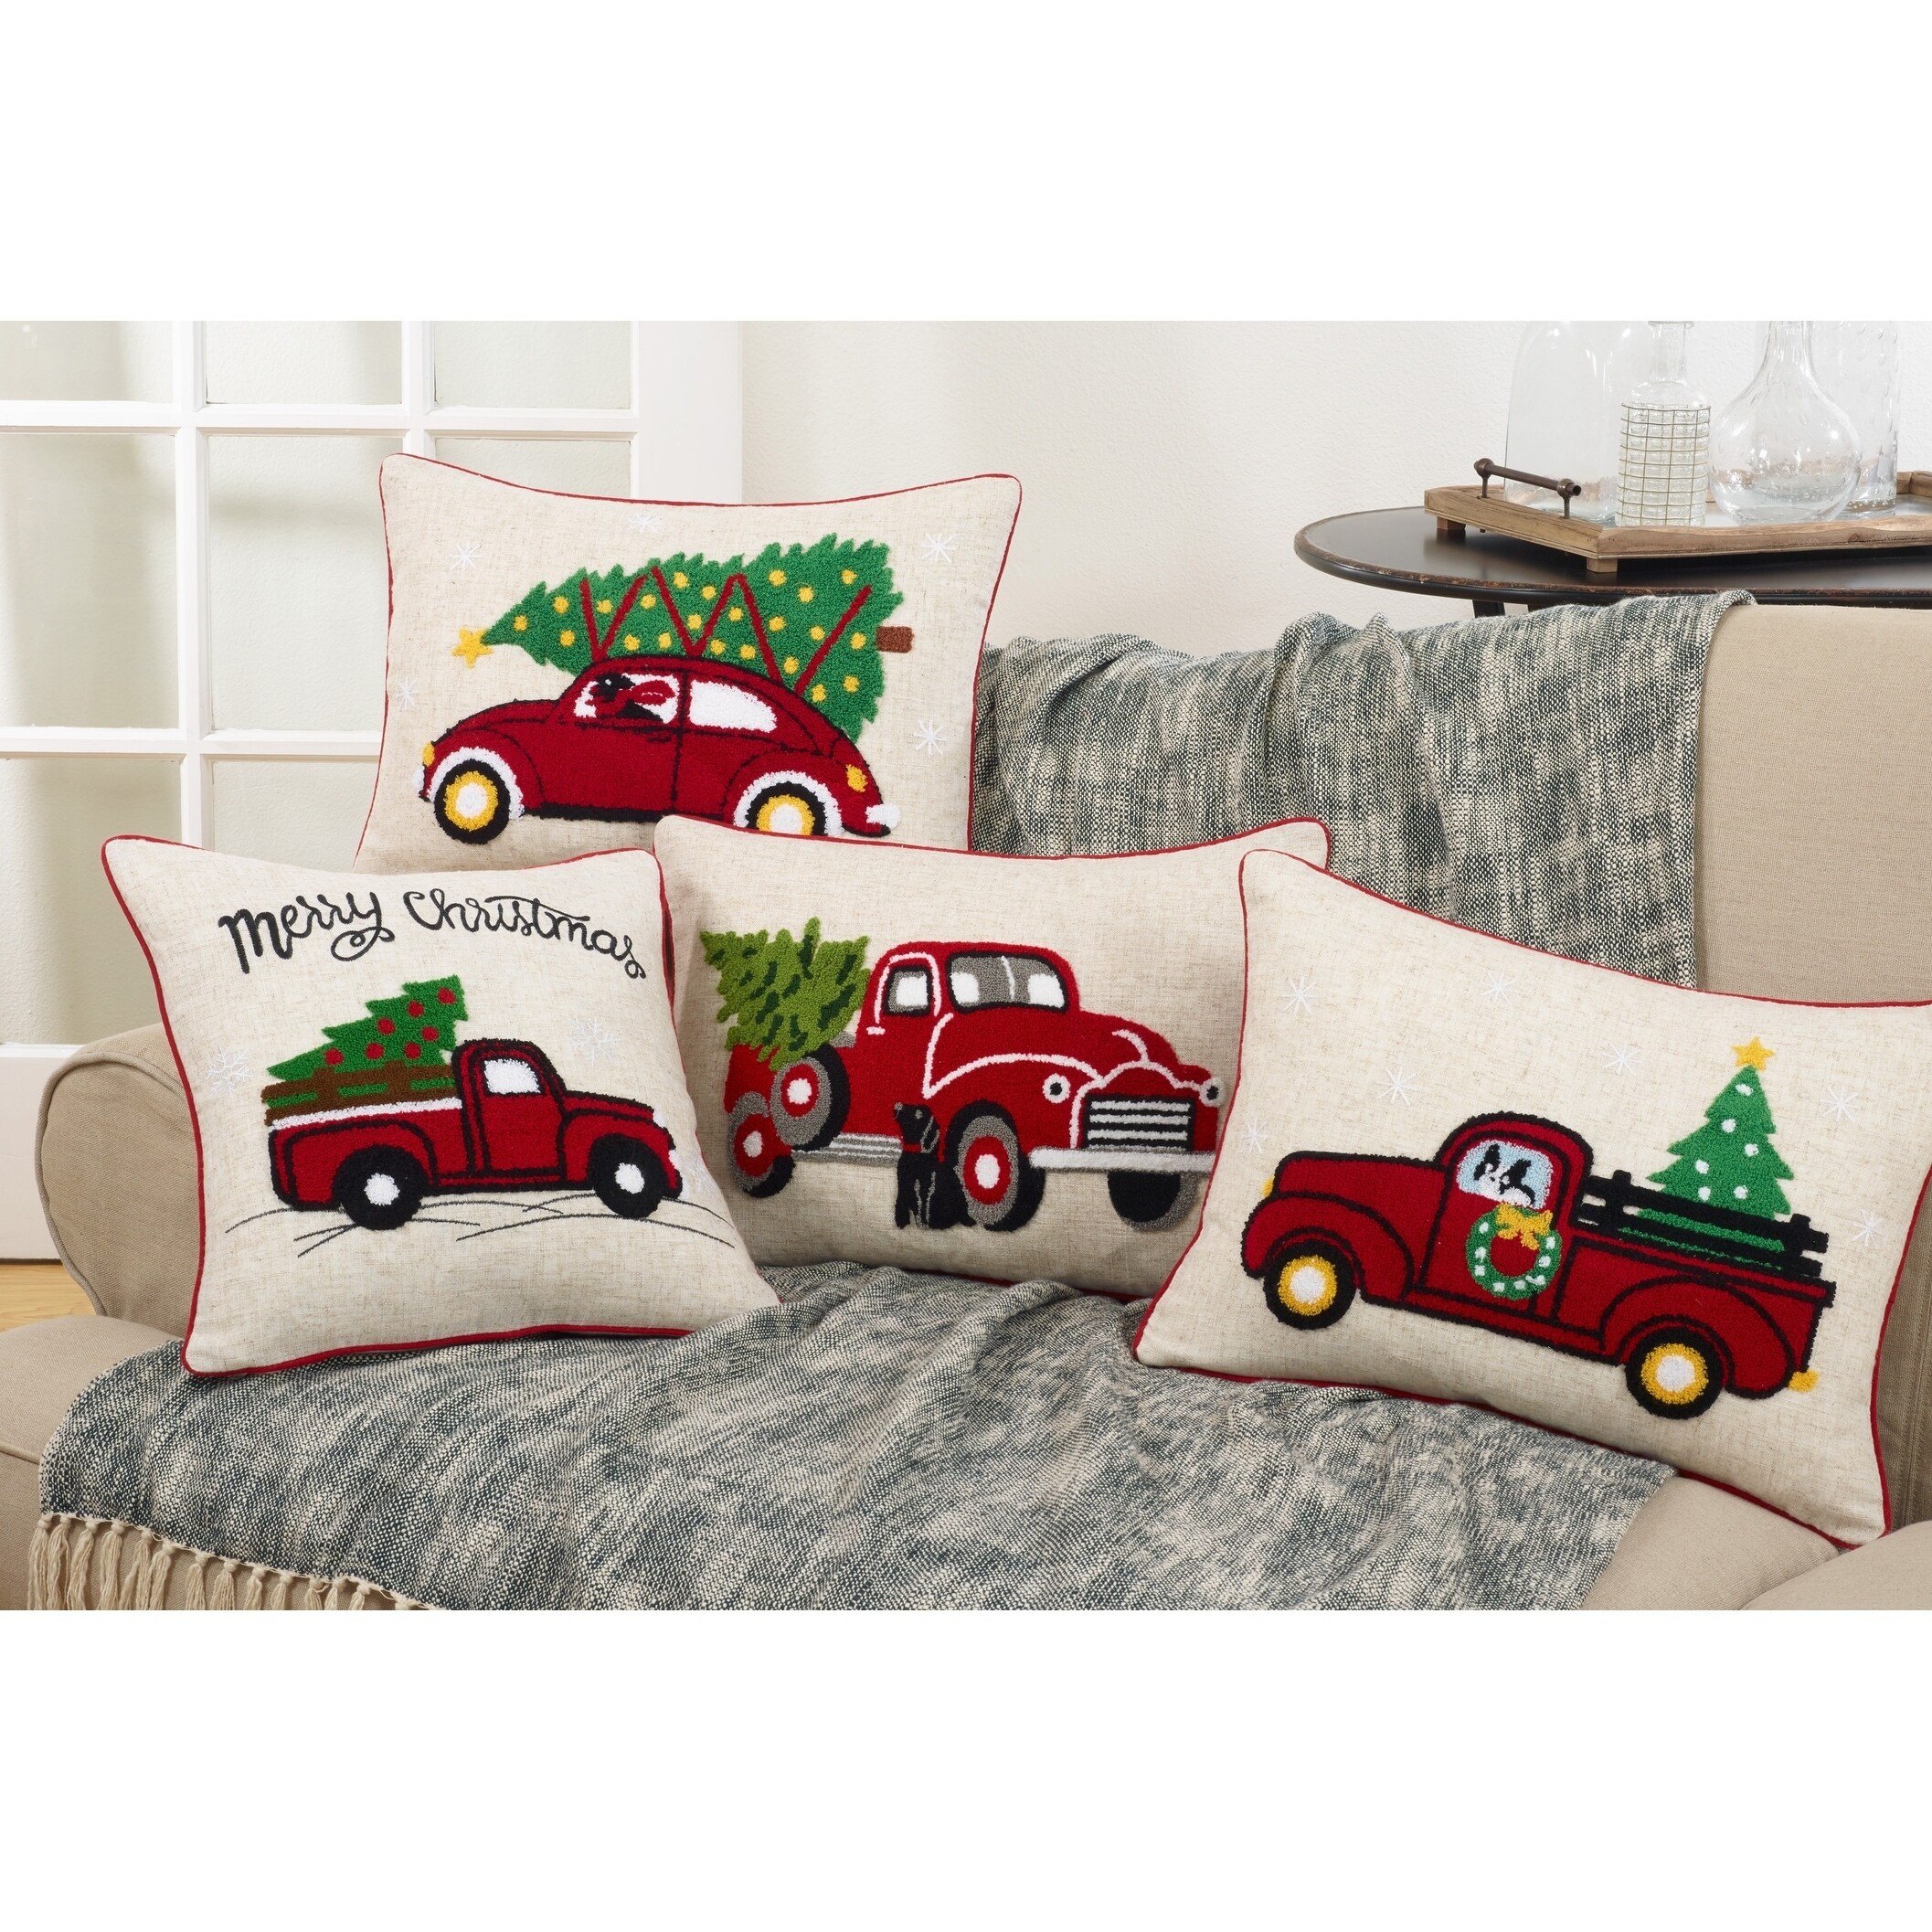 Red Christmas Truck Pillow Cover & Insert